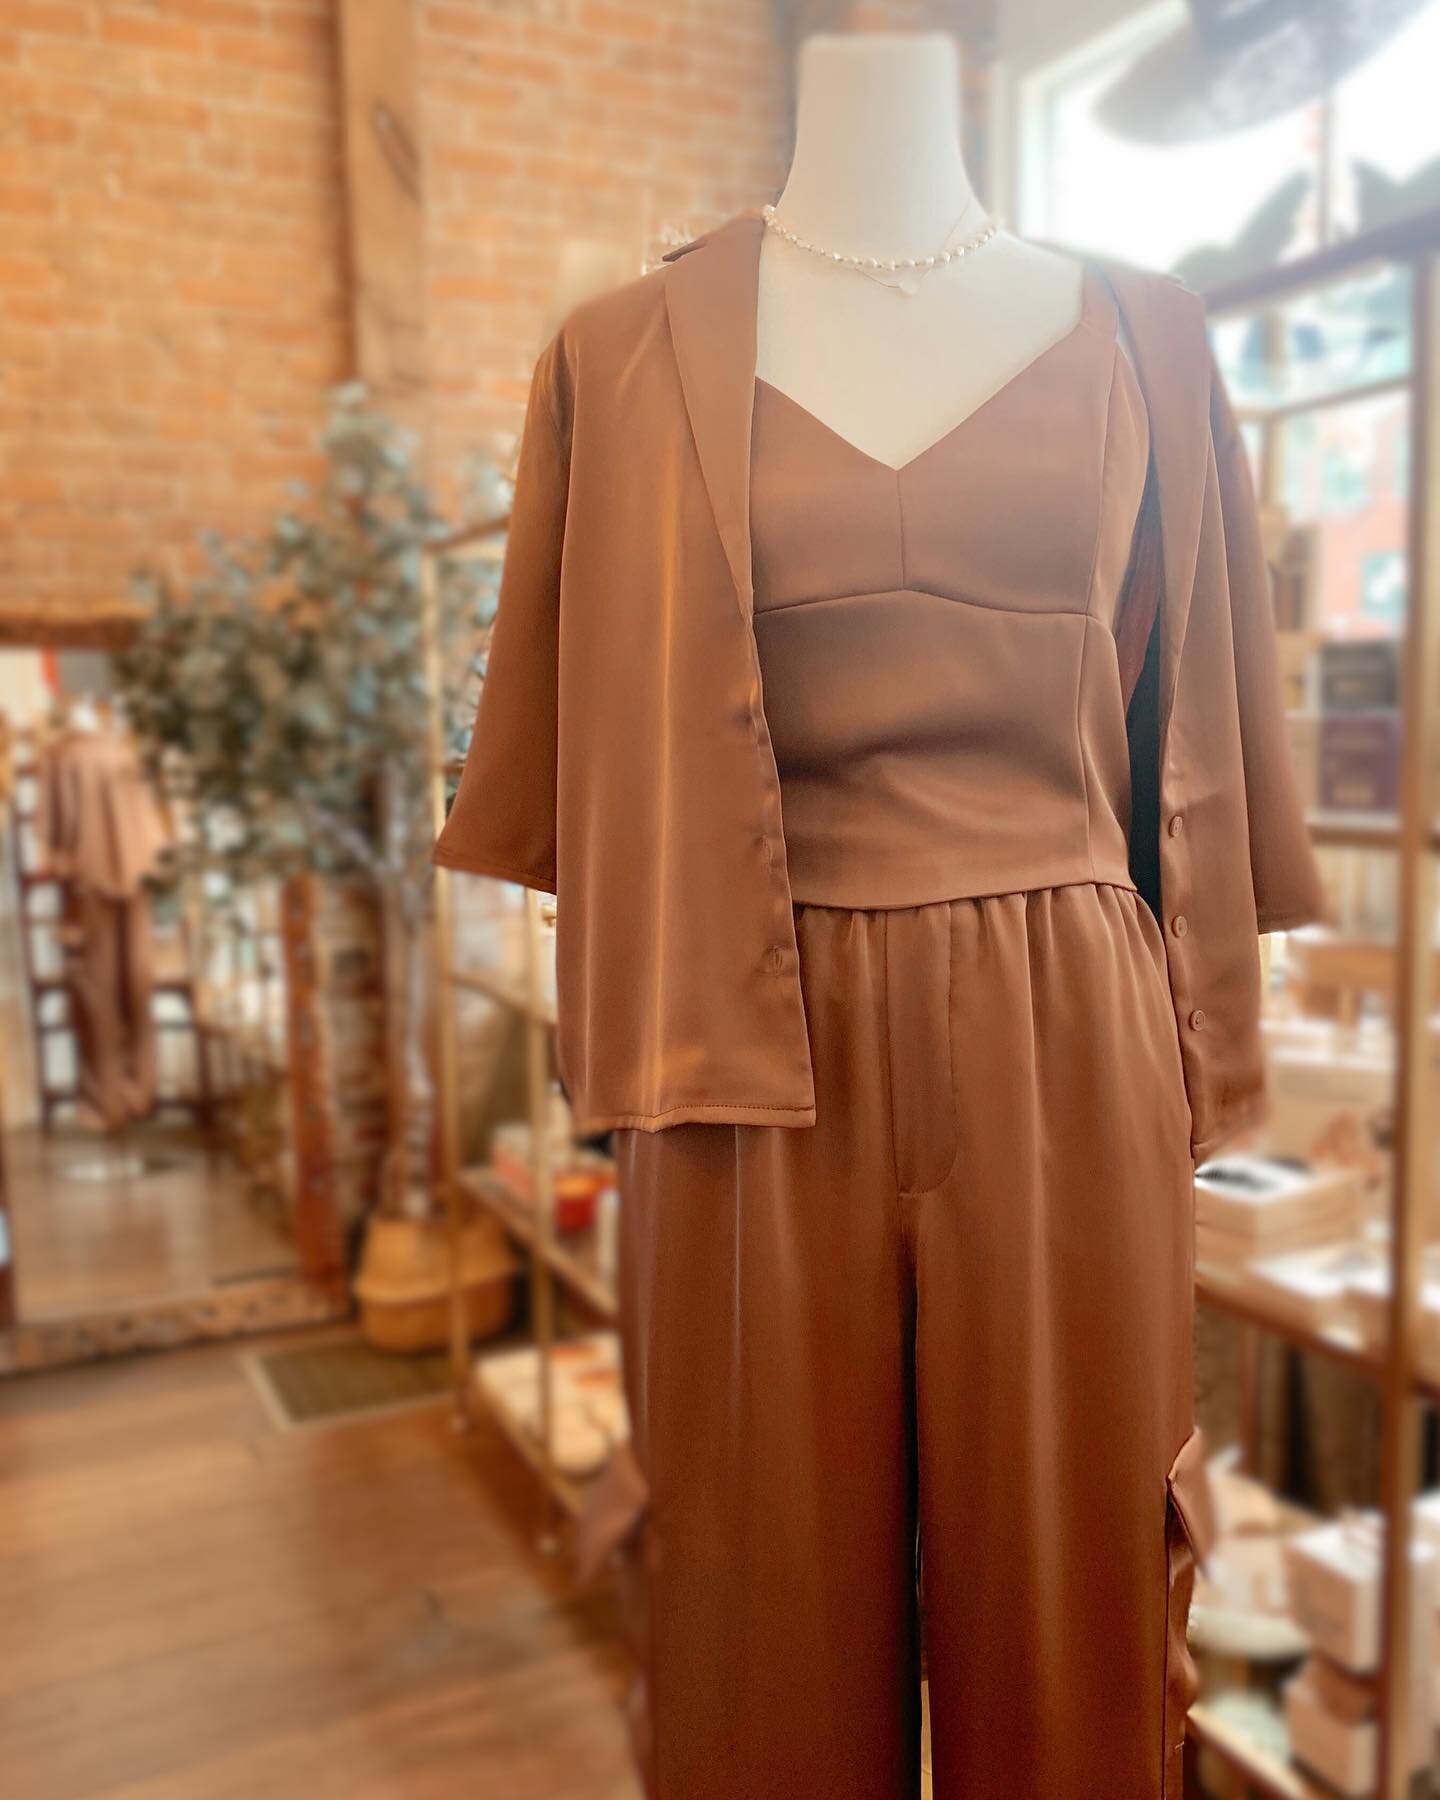 We always love a matching set🤩and we are going to be livinggg in this one all summer🤎Shop this set in store and online🤎

✨Open 10-7 today✨

#luciaboutique #saratogasprings #saratogamarketplace #matchingset #gentlefawn